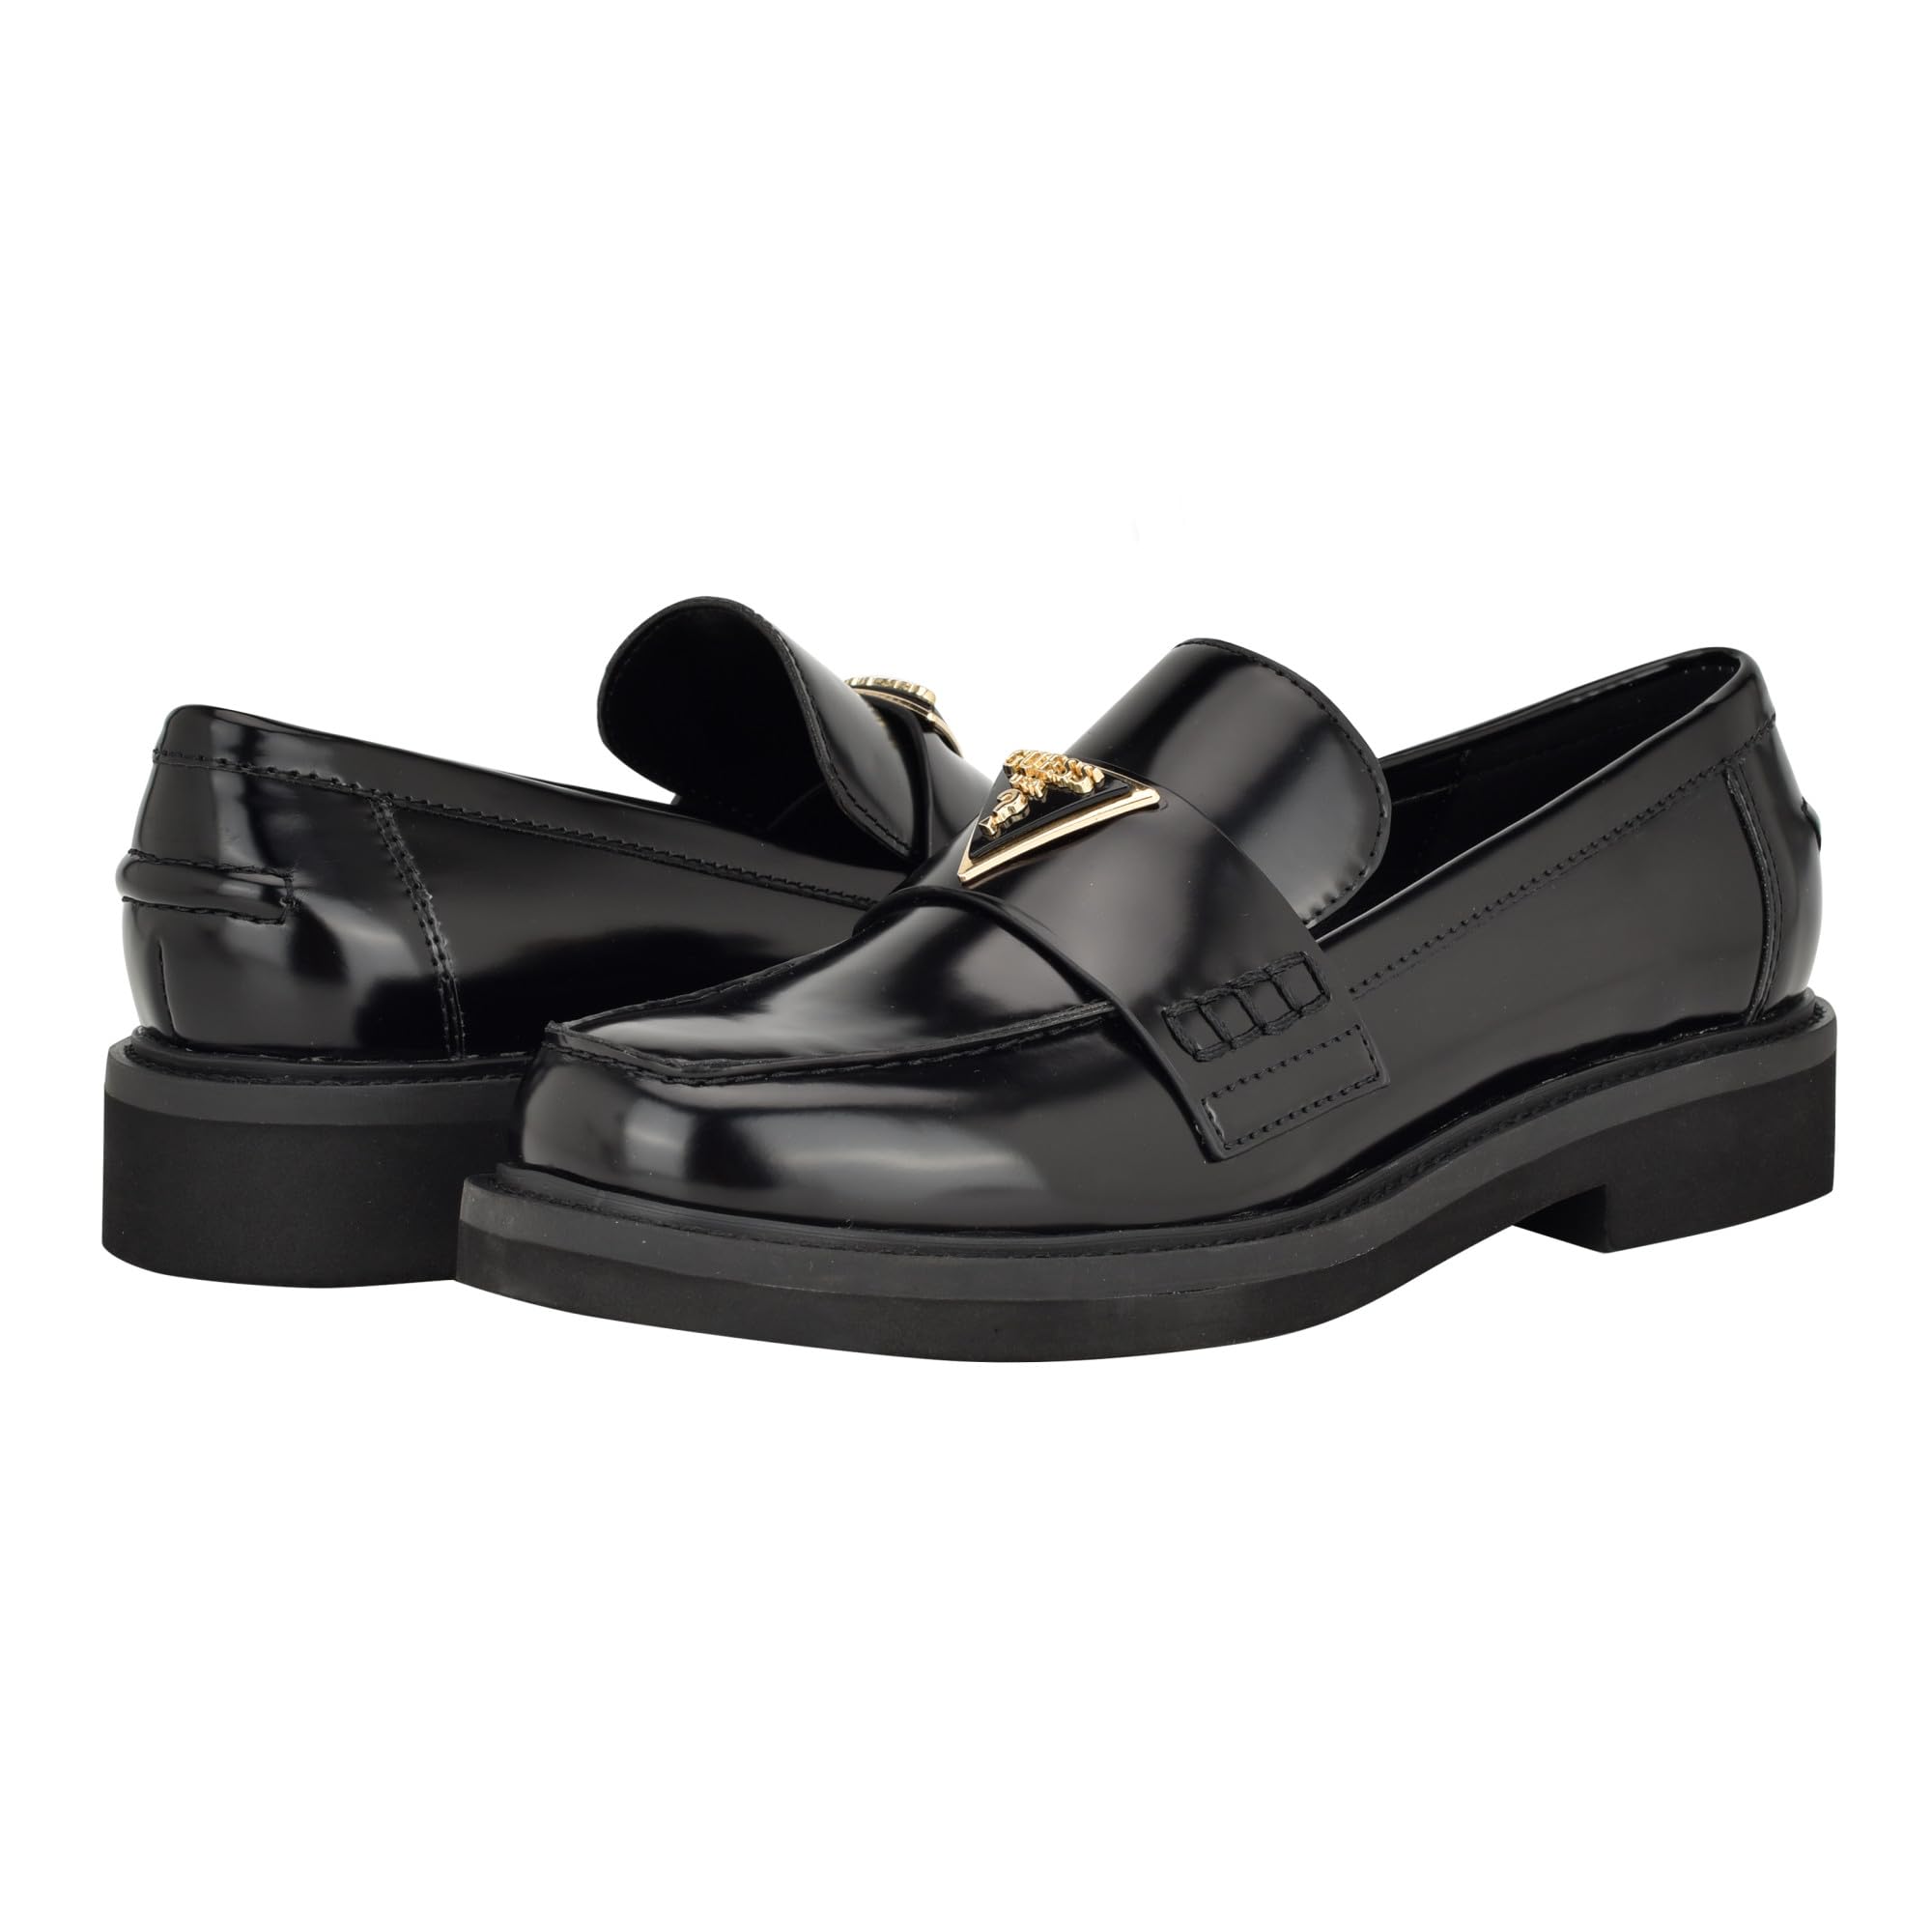 GUESS Women's Shatha Loafer